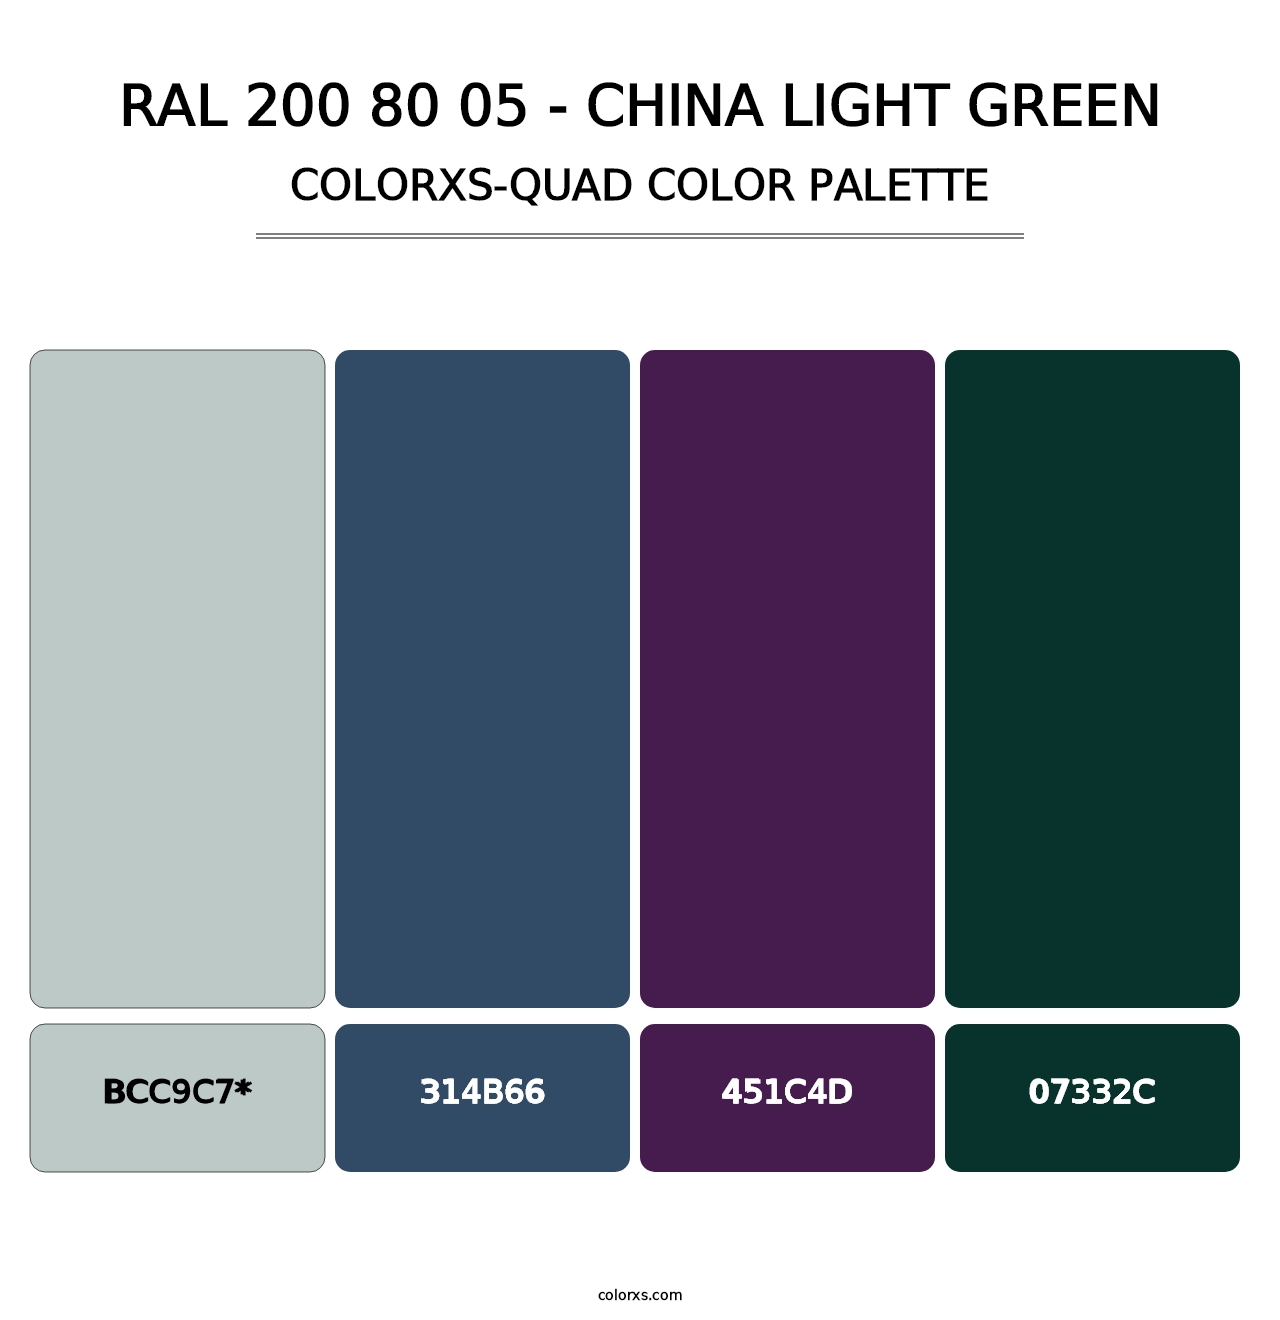 RAL 200 80 05 - China Light Green - Colorxs Quad Palette